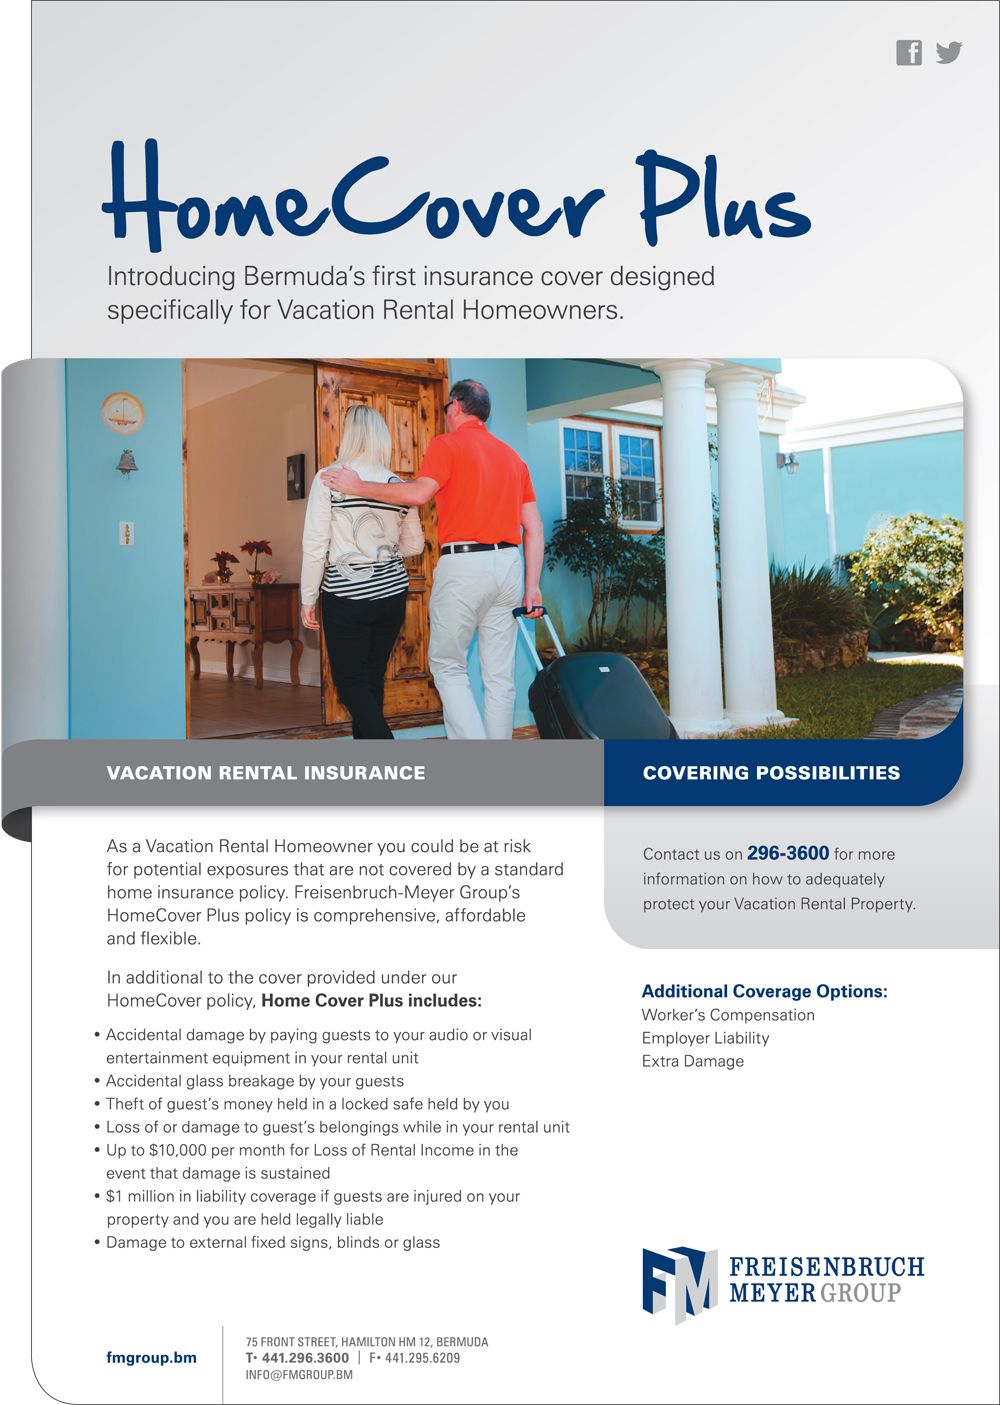 fres-meyer-homecover-plus